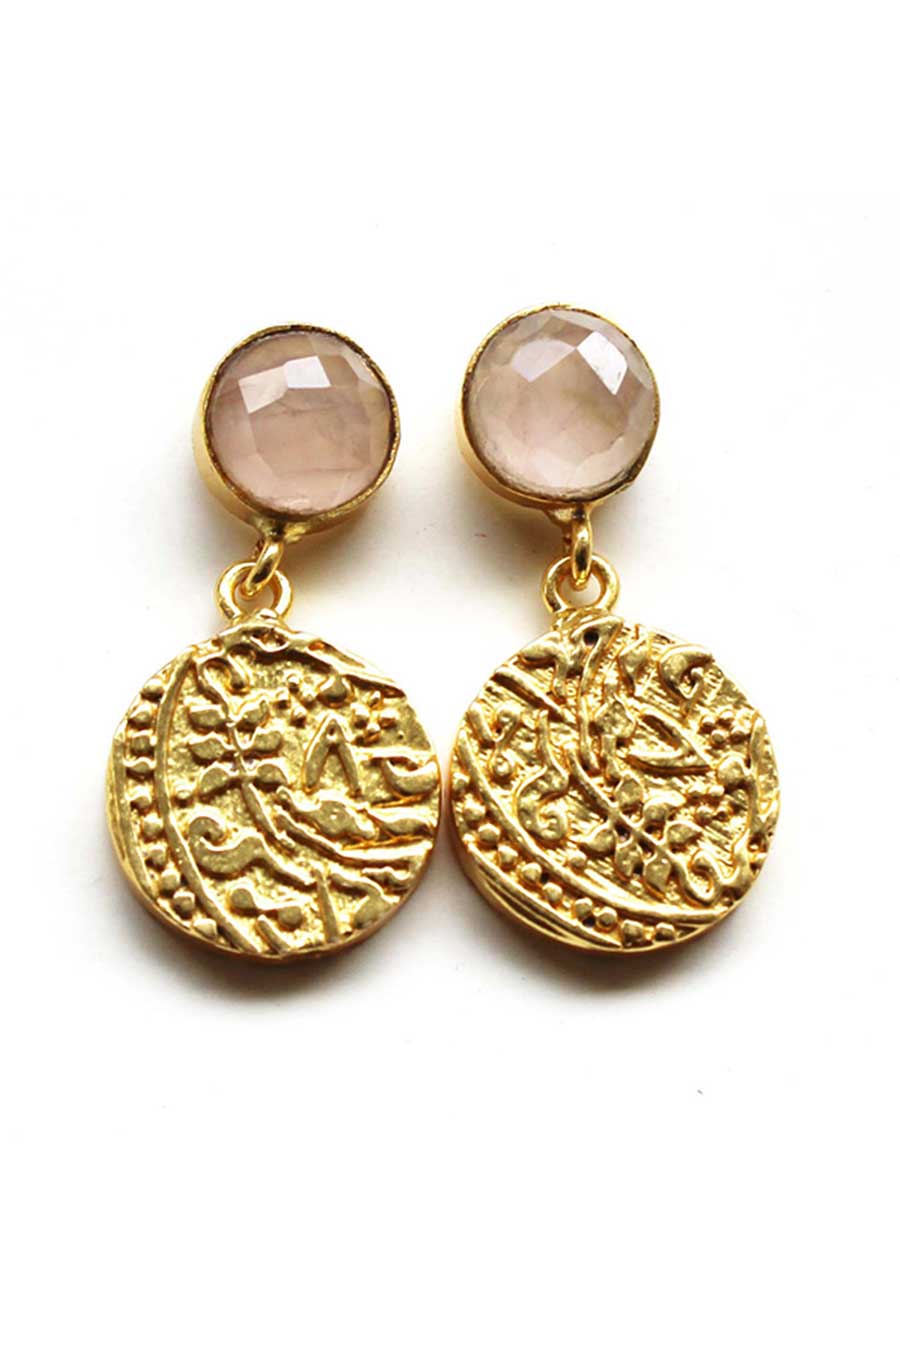 Vintage Coin Drop Earrings with Rose Quartz